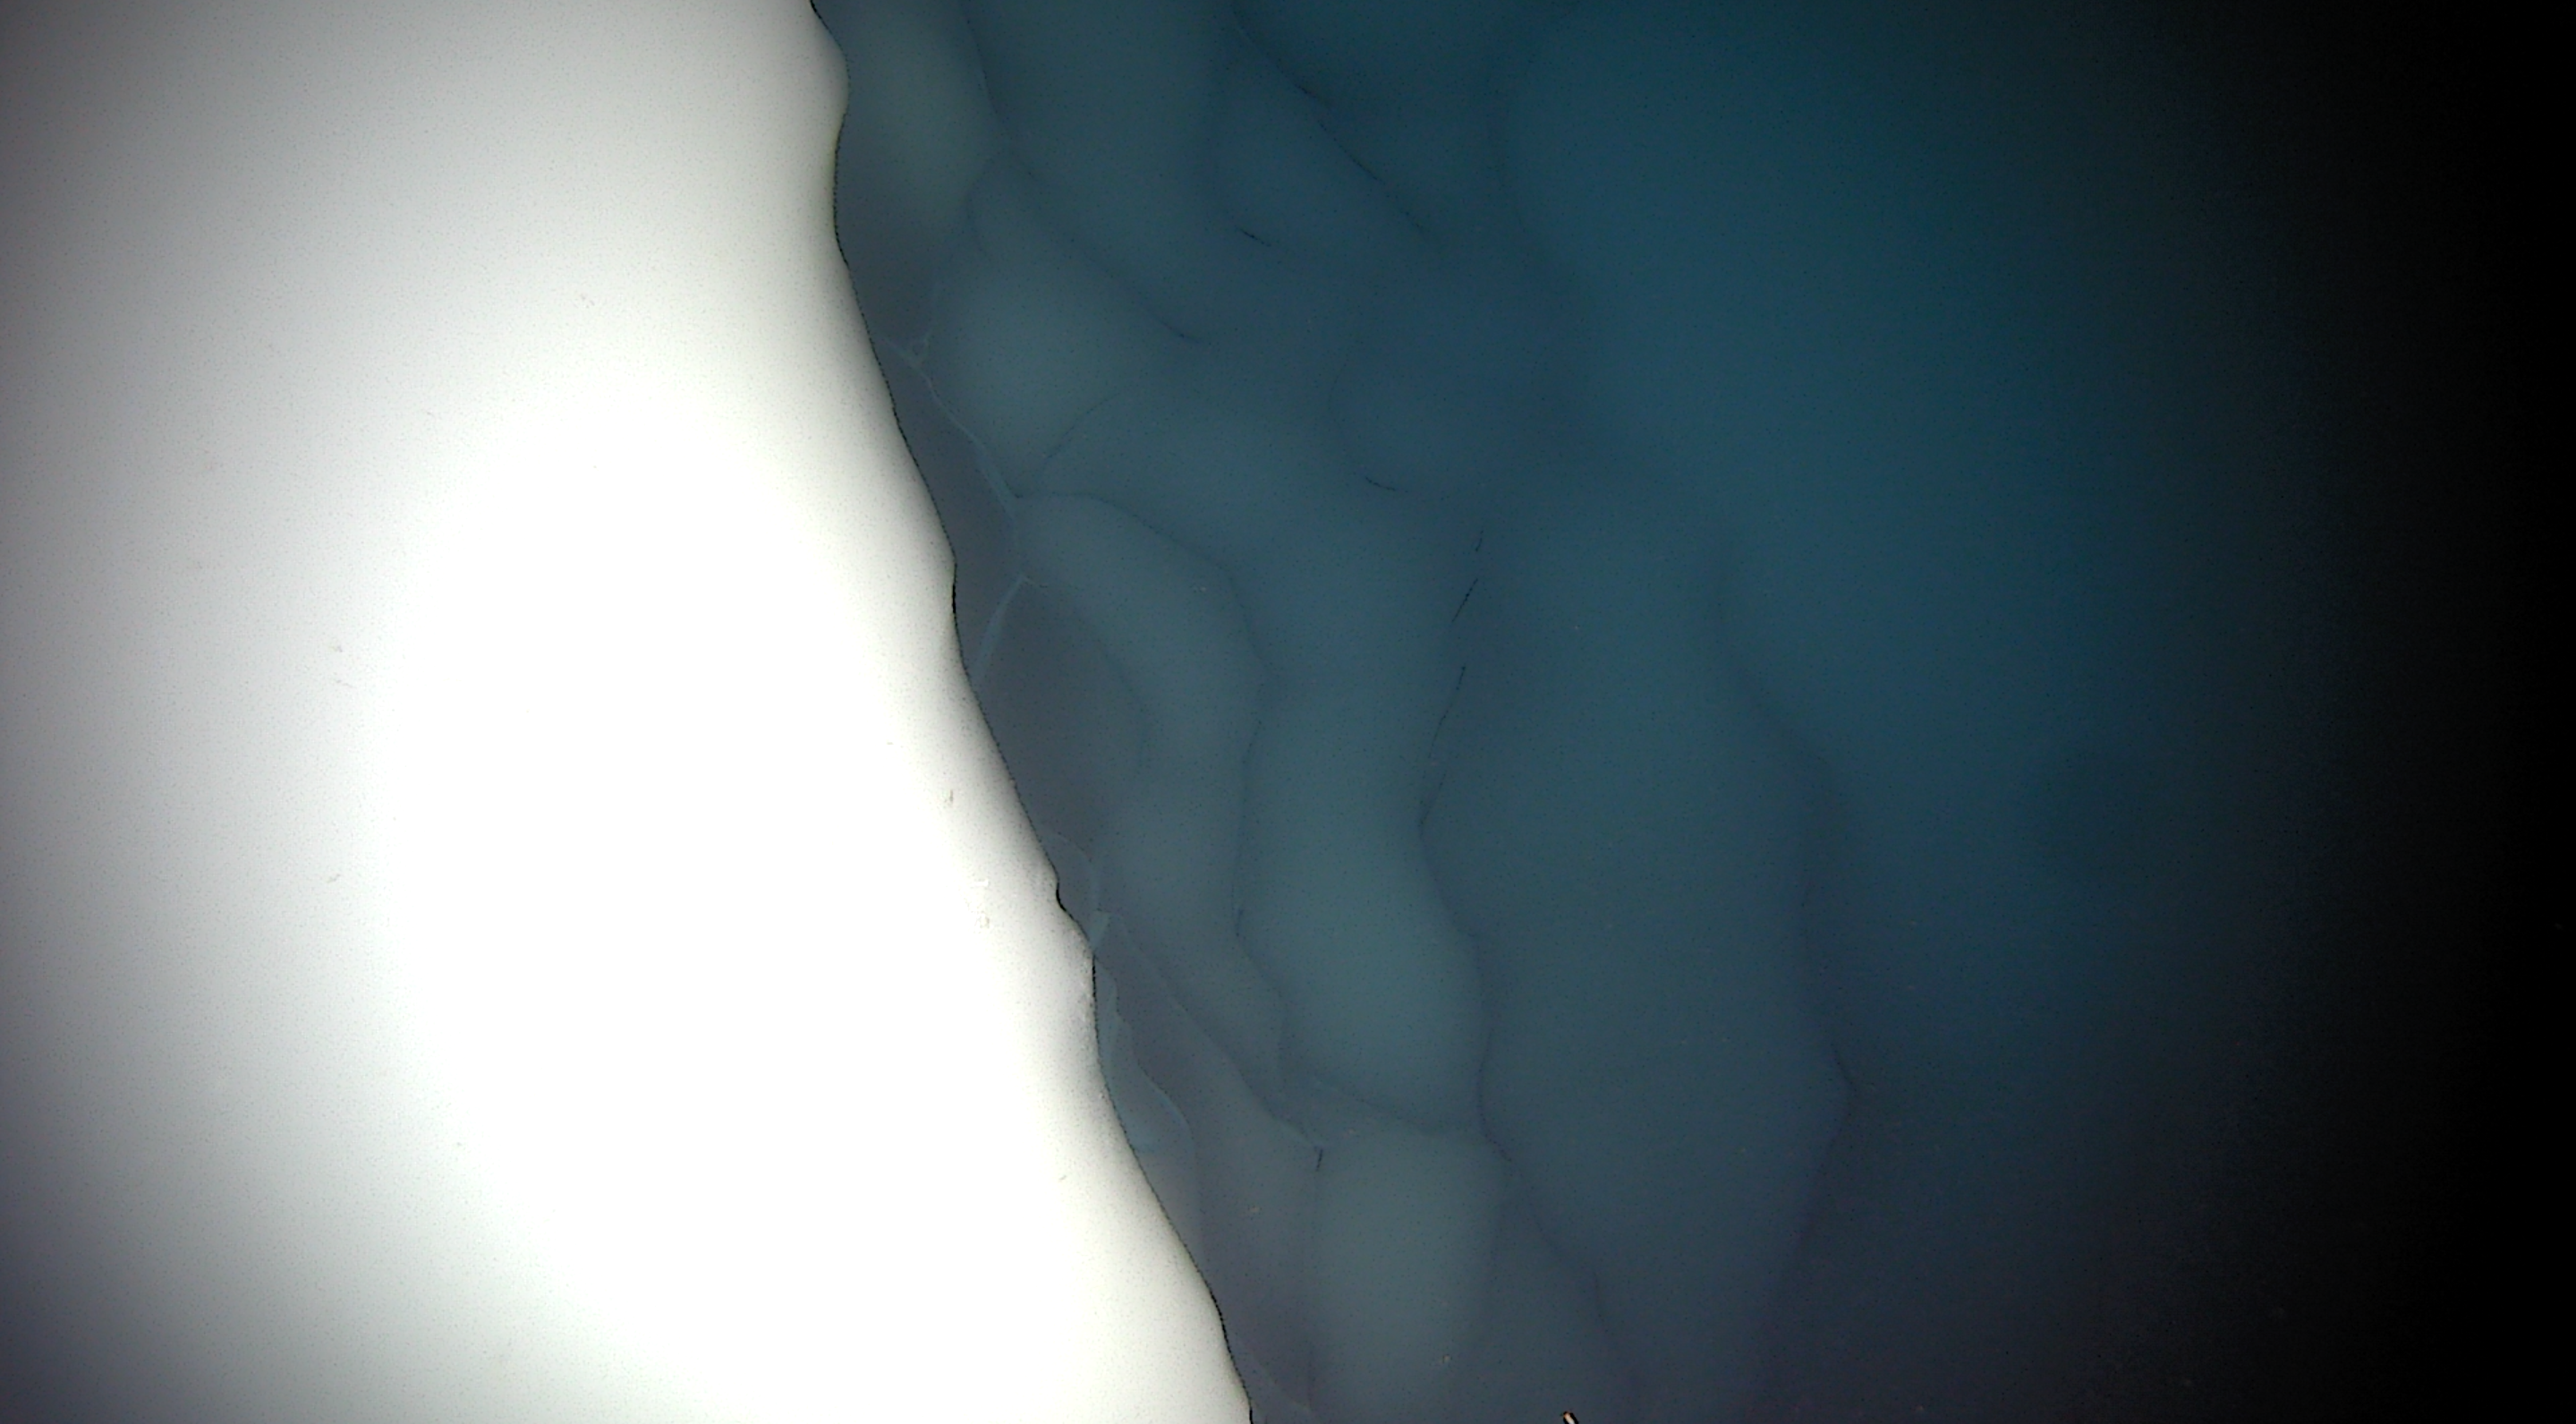 Photograph of a terrace on the underside of Thwaites Glacier in Antarctica, as taken by Icefin.